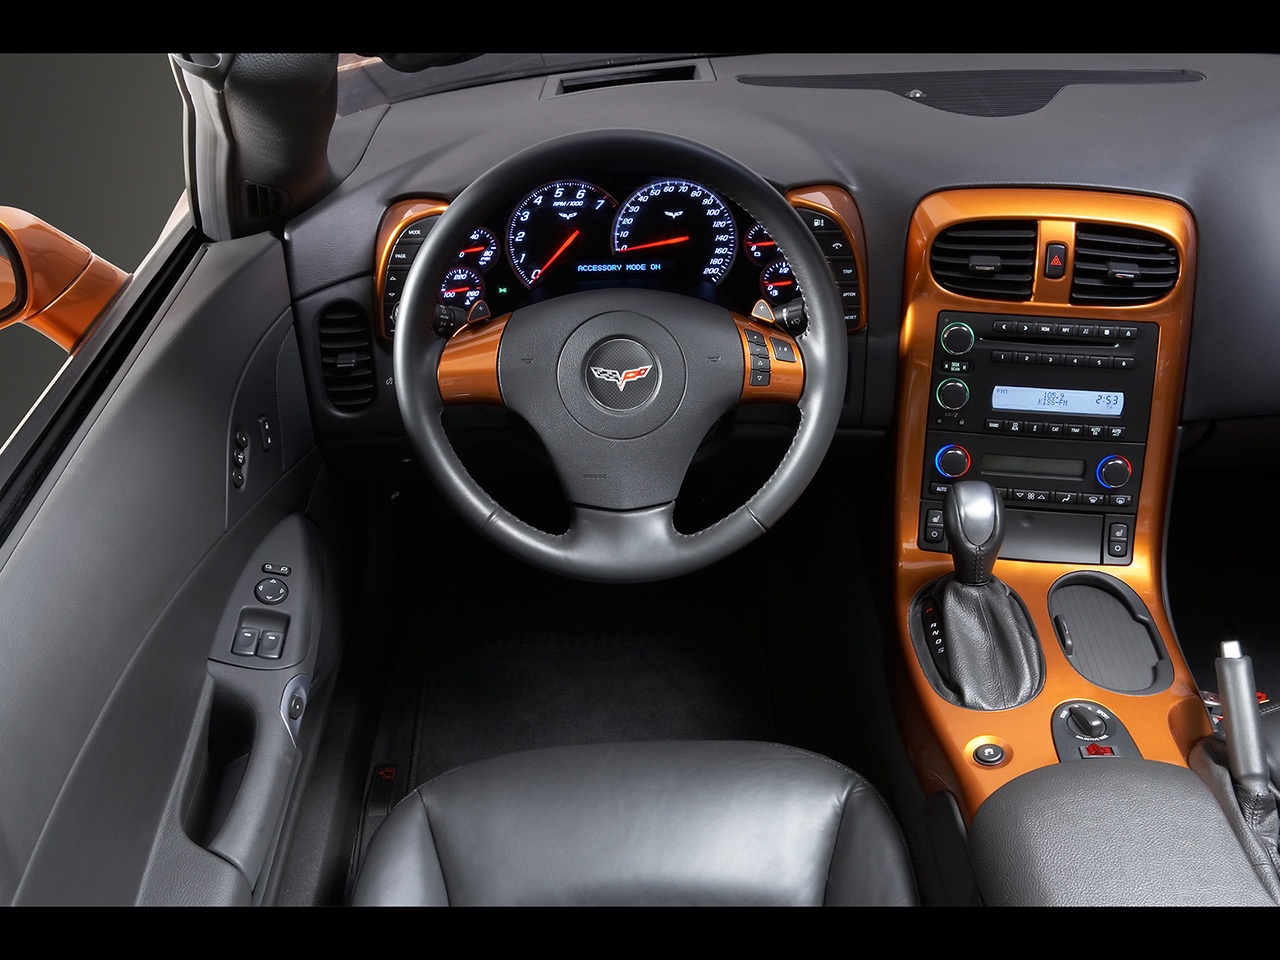 What does the dashboard display inform you?